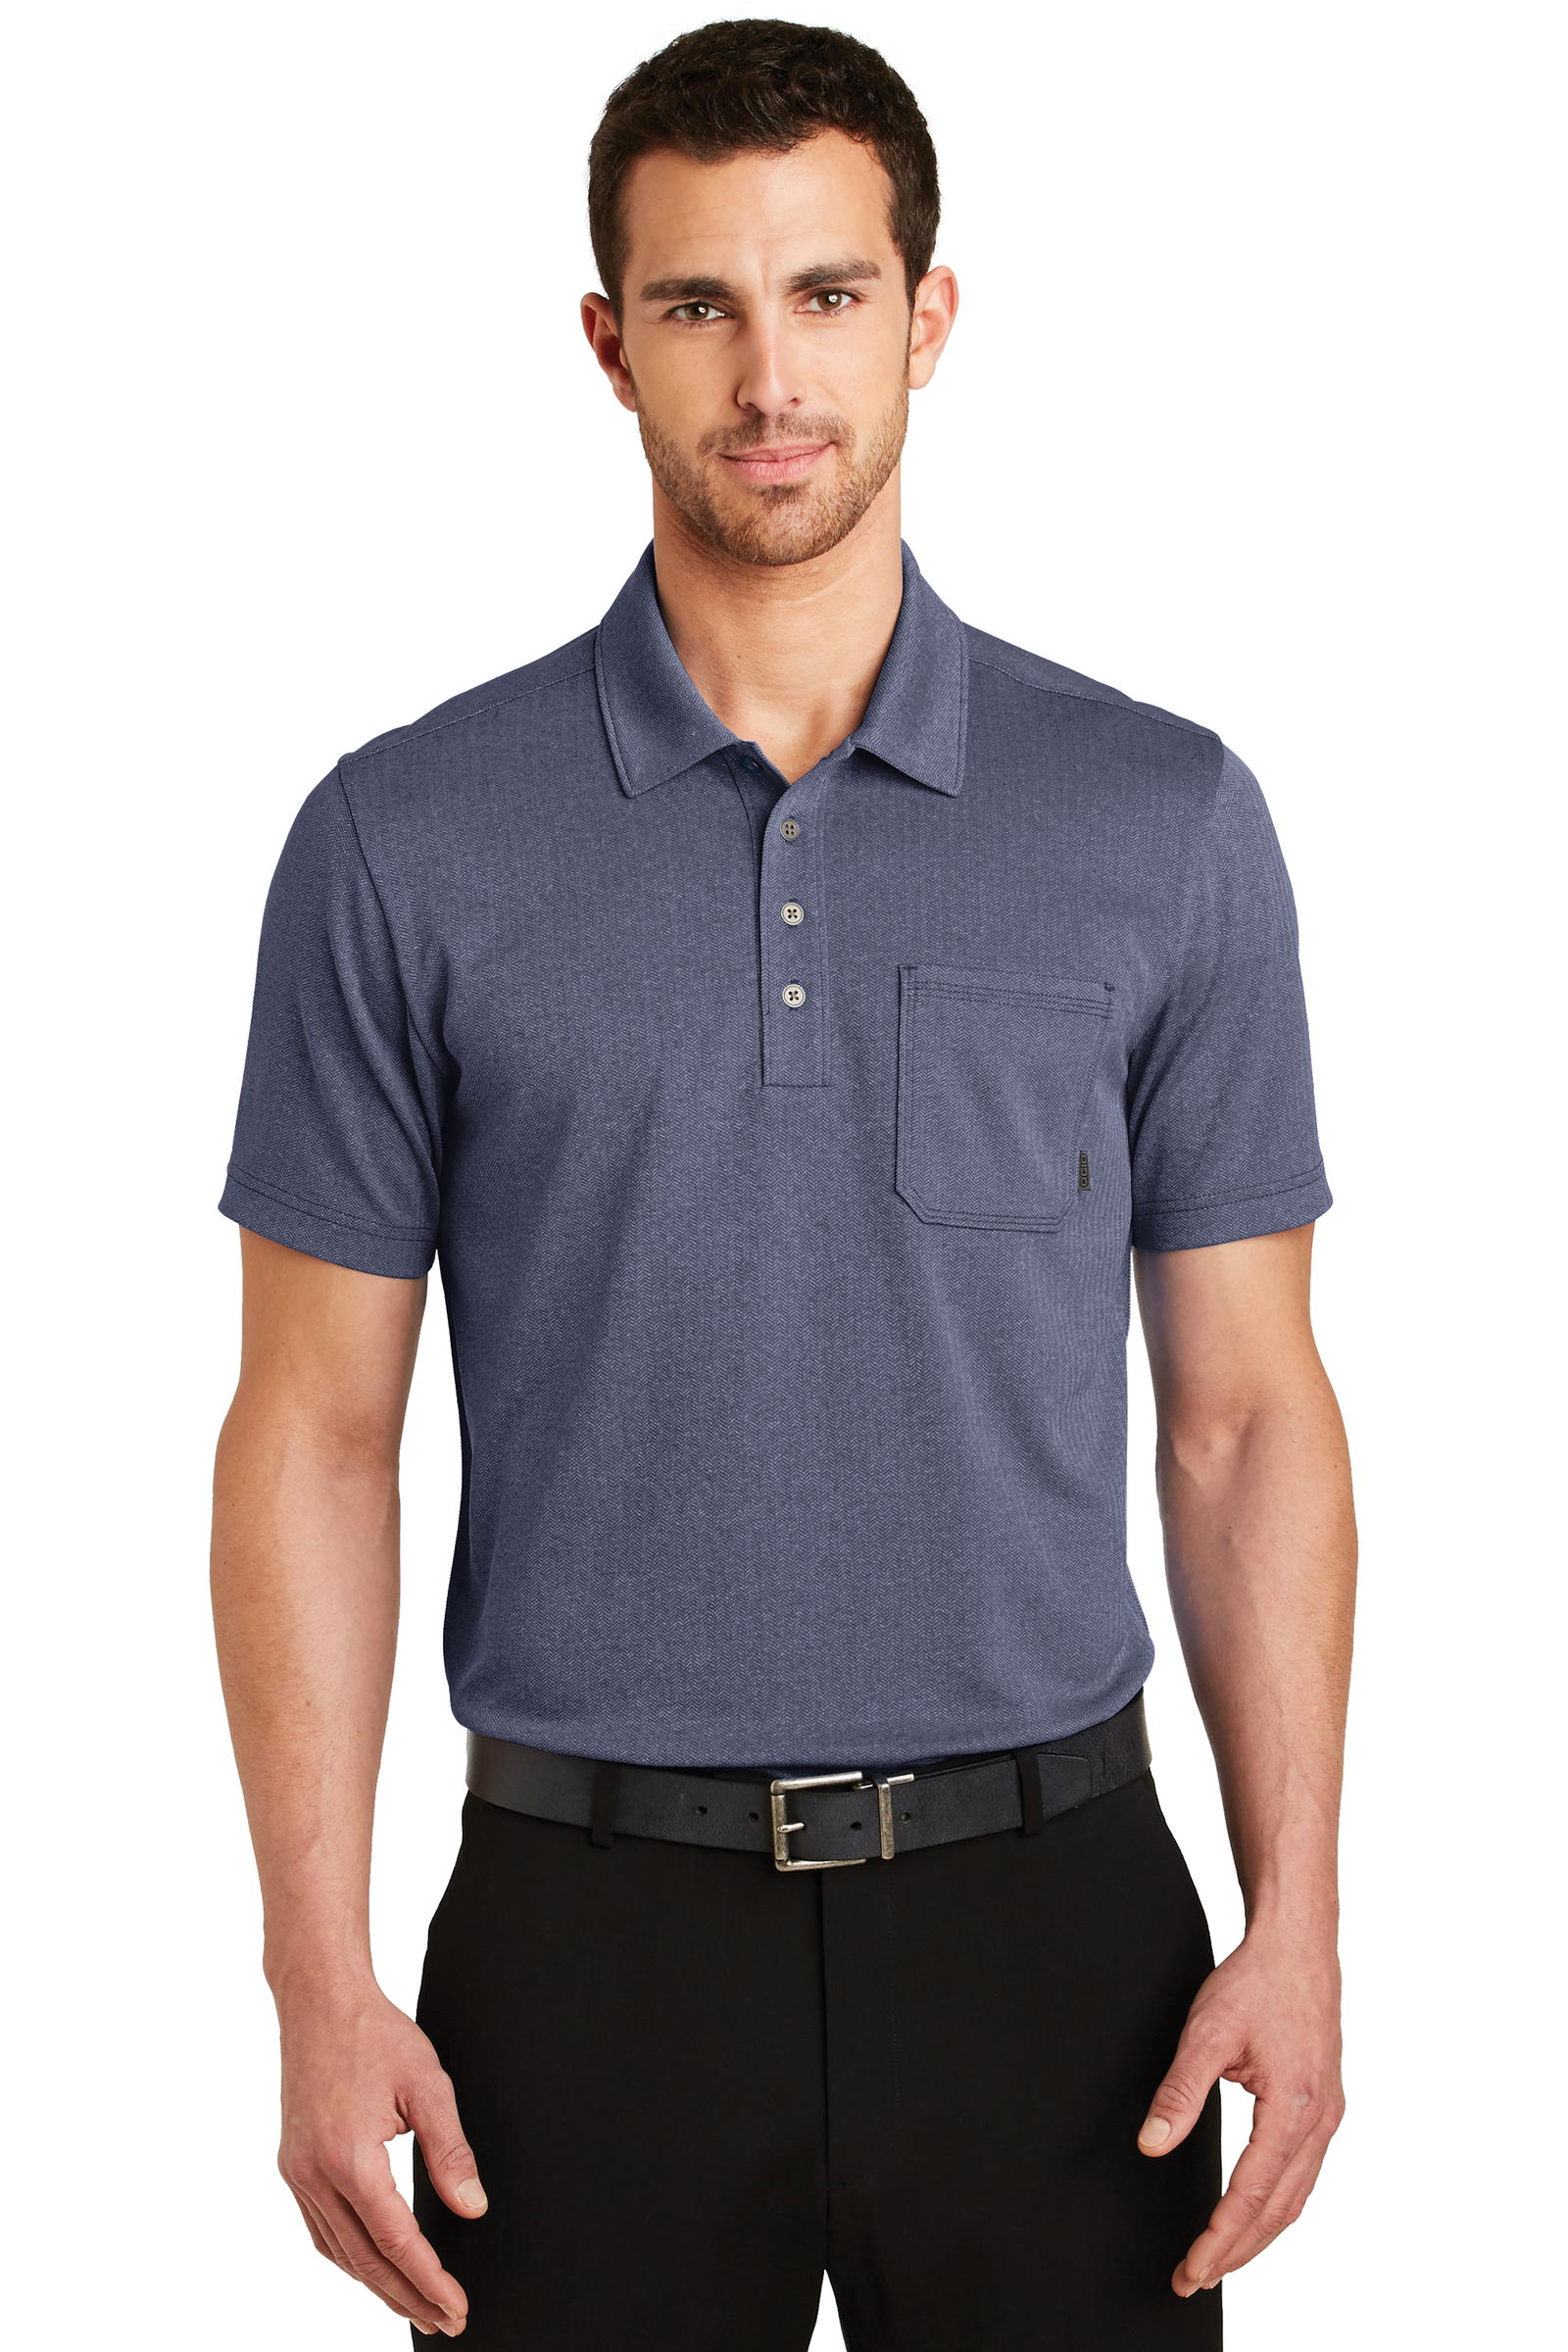 OGIO Embroidered Men's Express Polo | All Products - Queensboro